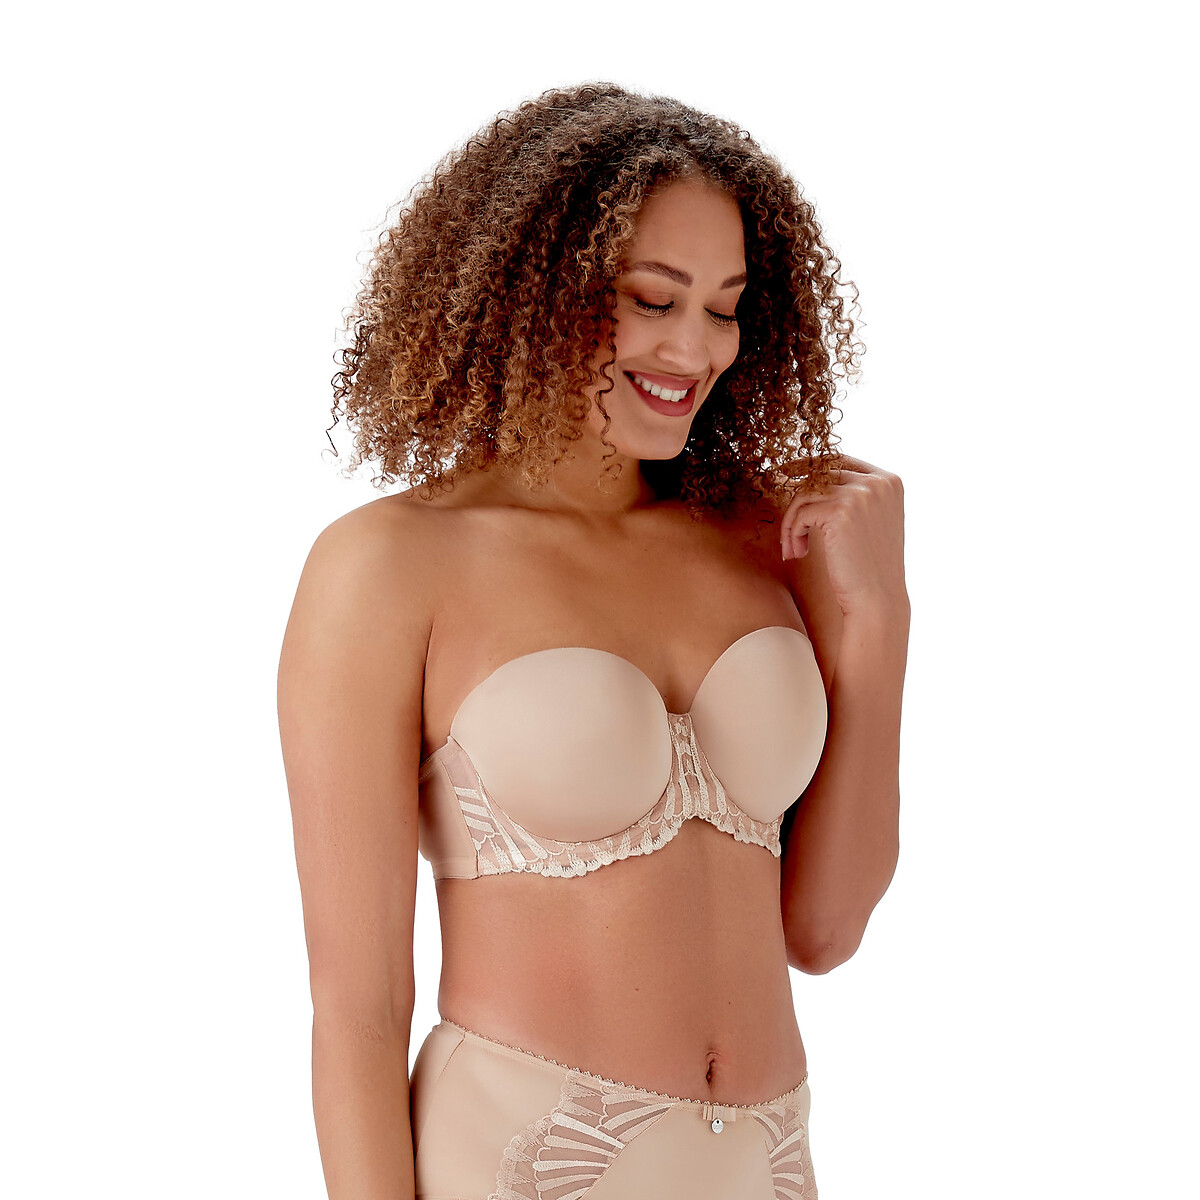 Berlie White Strapless Bra With Attachable Straps 34D 